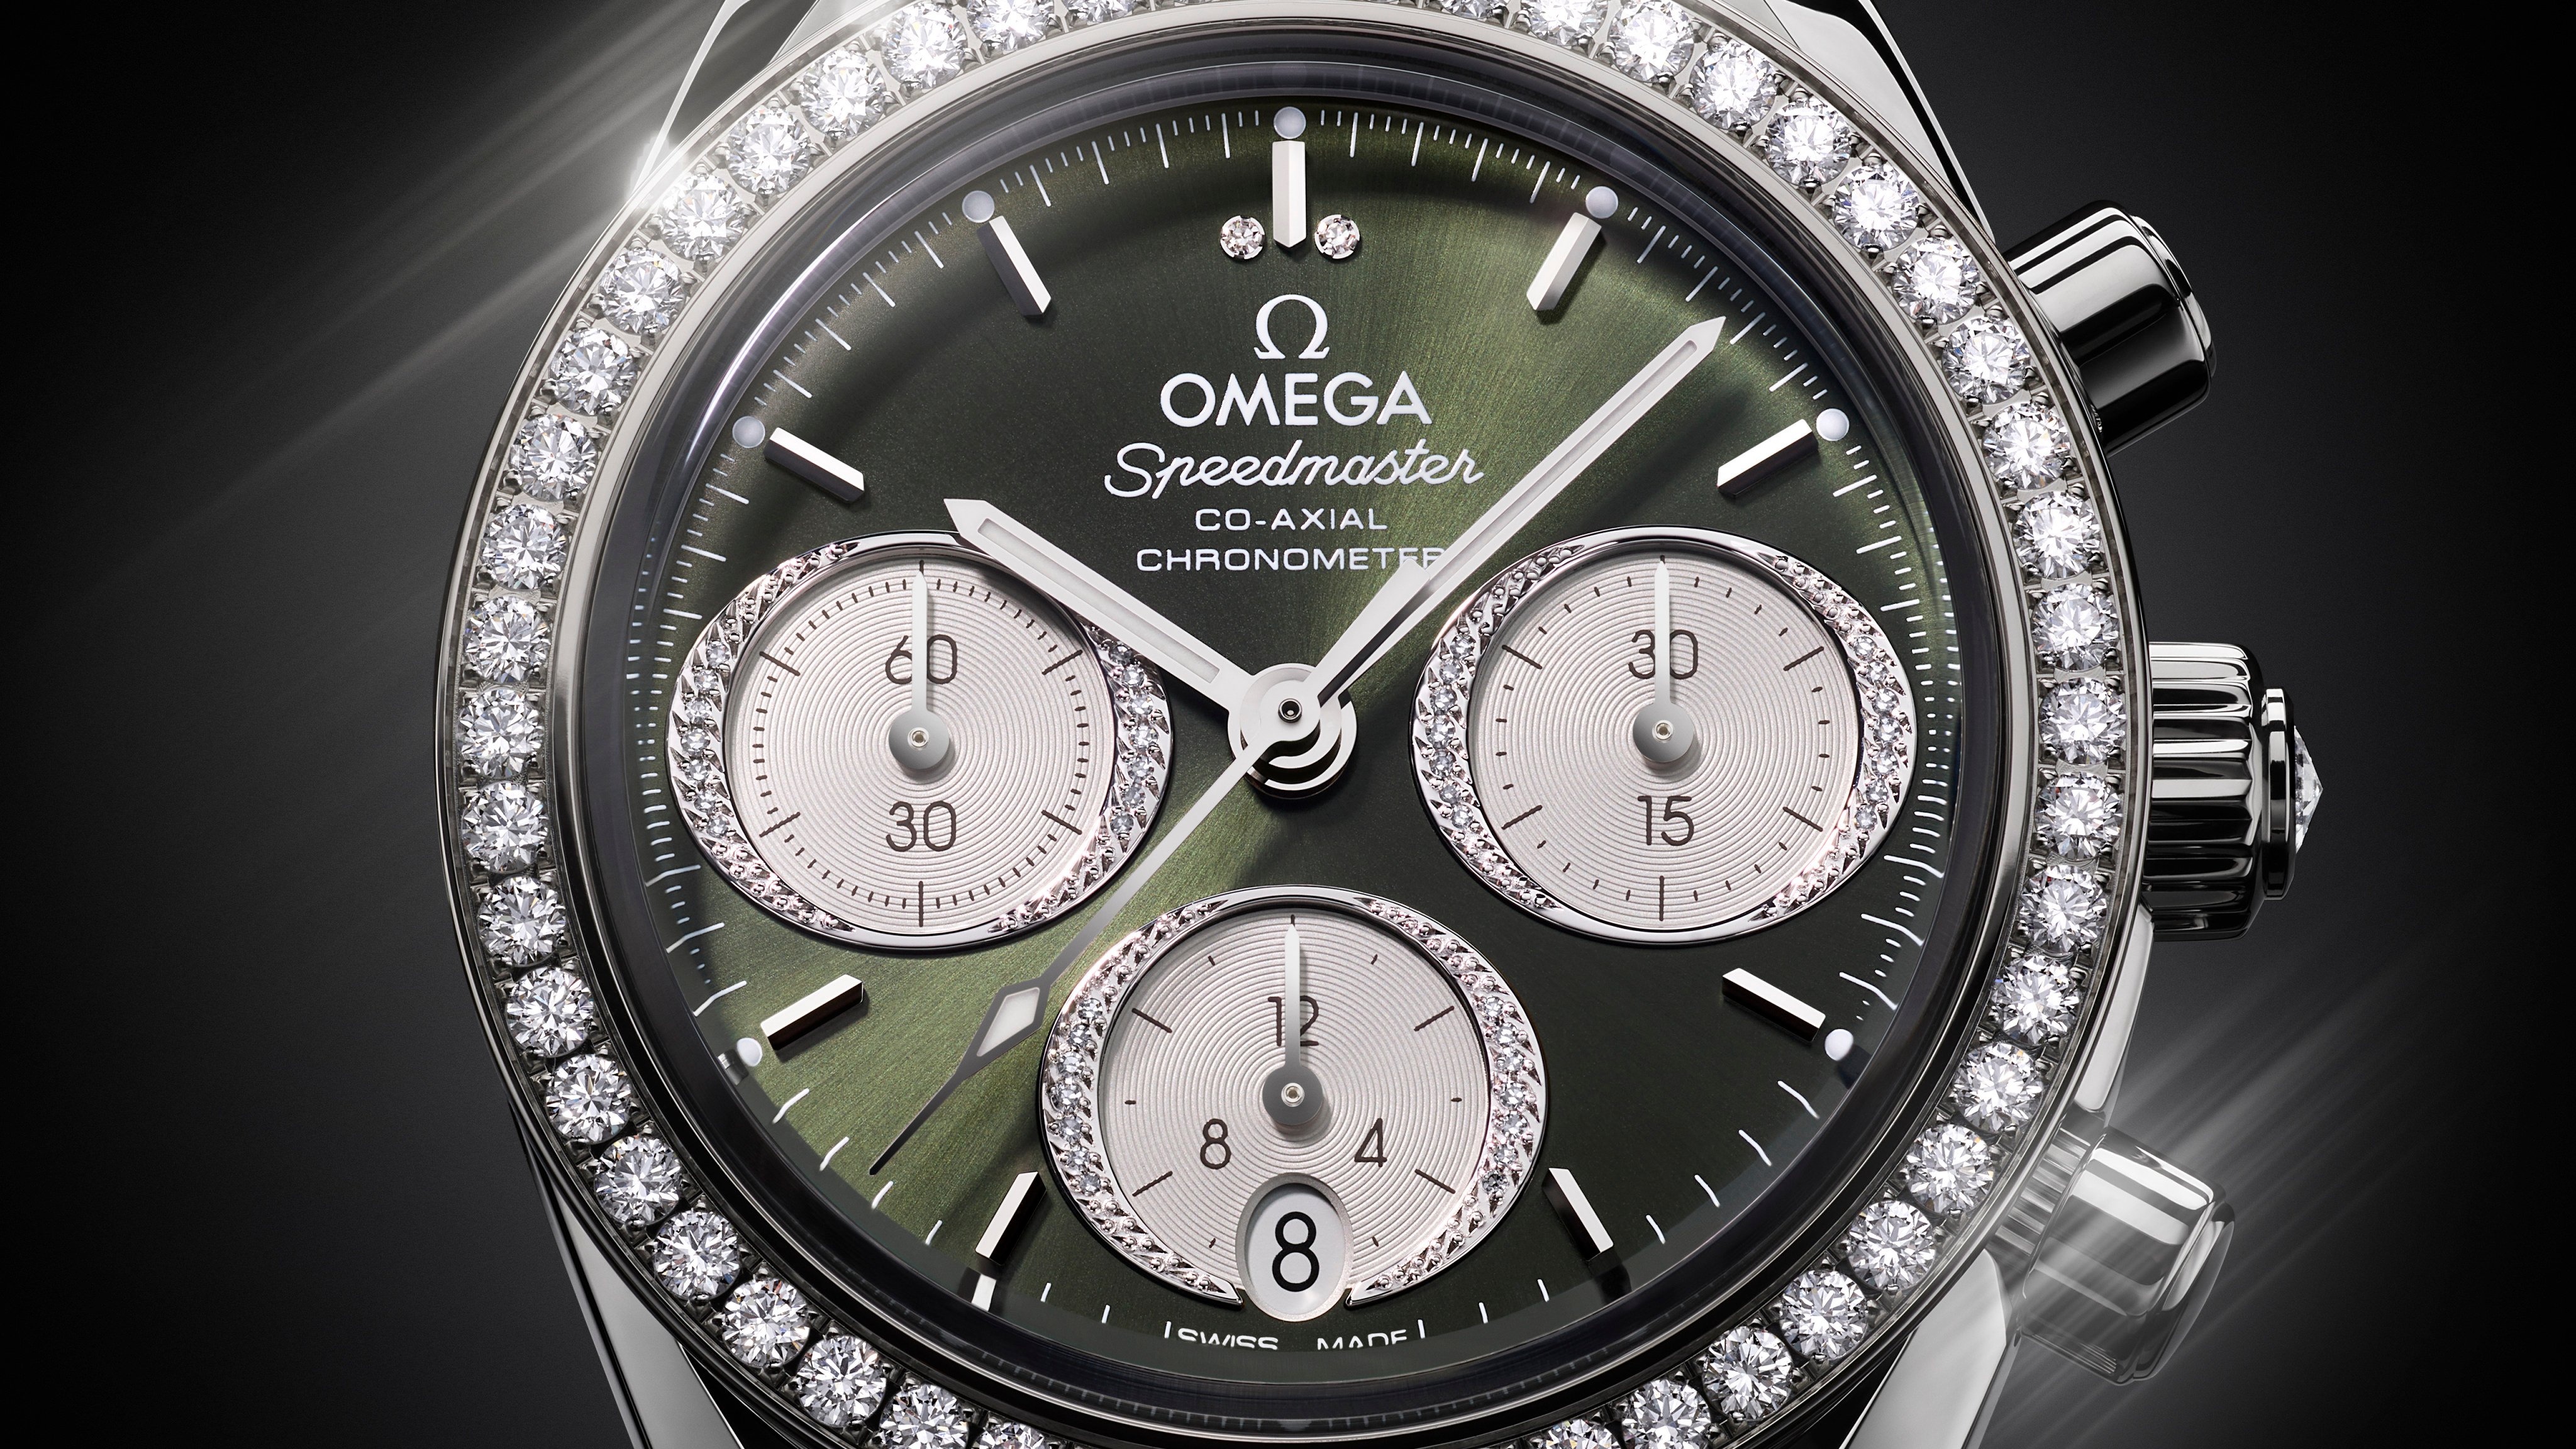 Omega’s Speedmaster Co-Axial Chronometer watch is glittering with diamonds. Photos: Handout